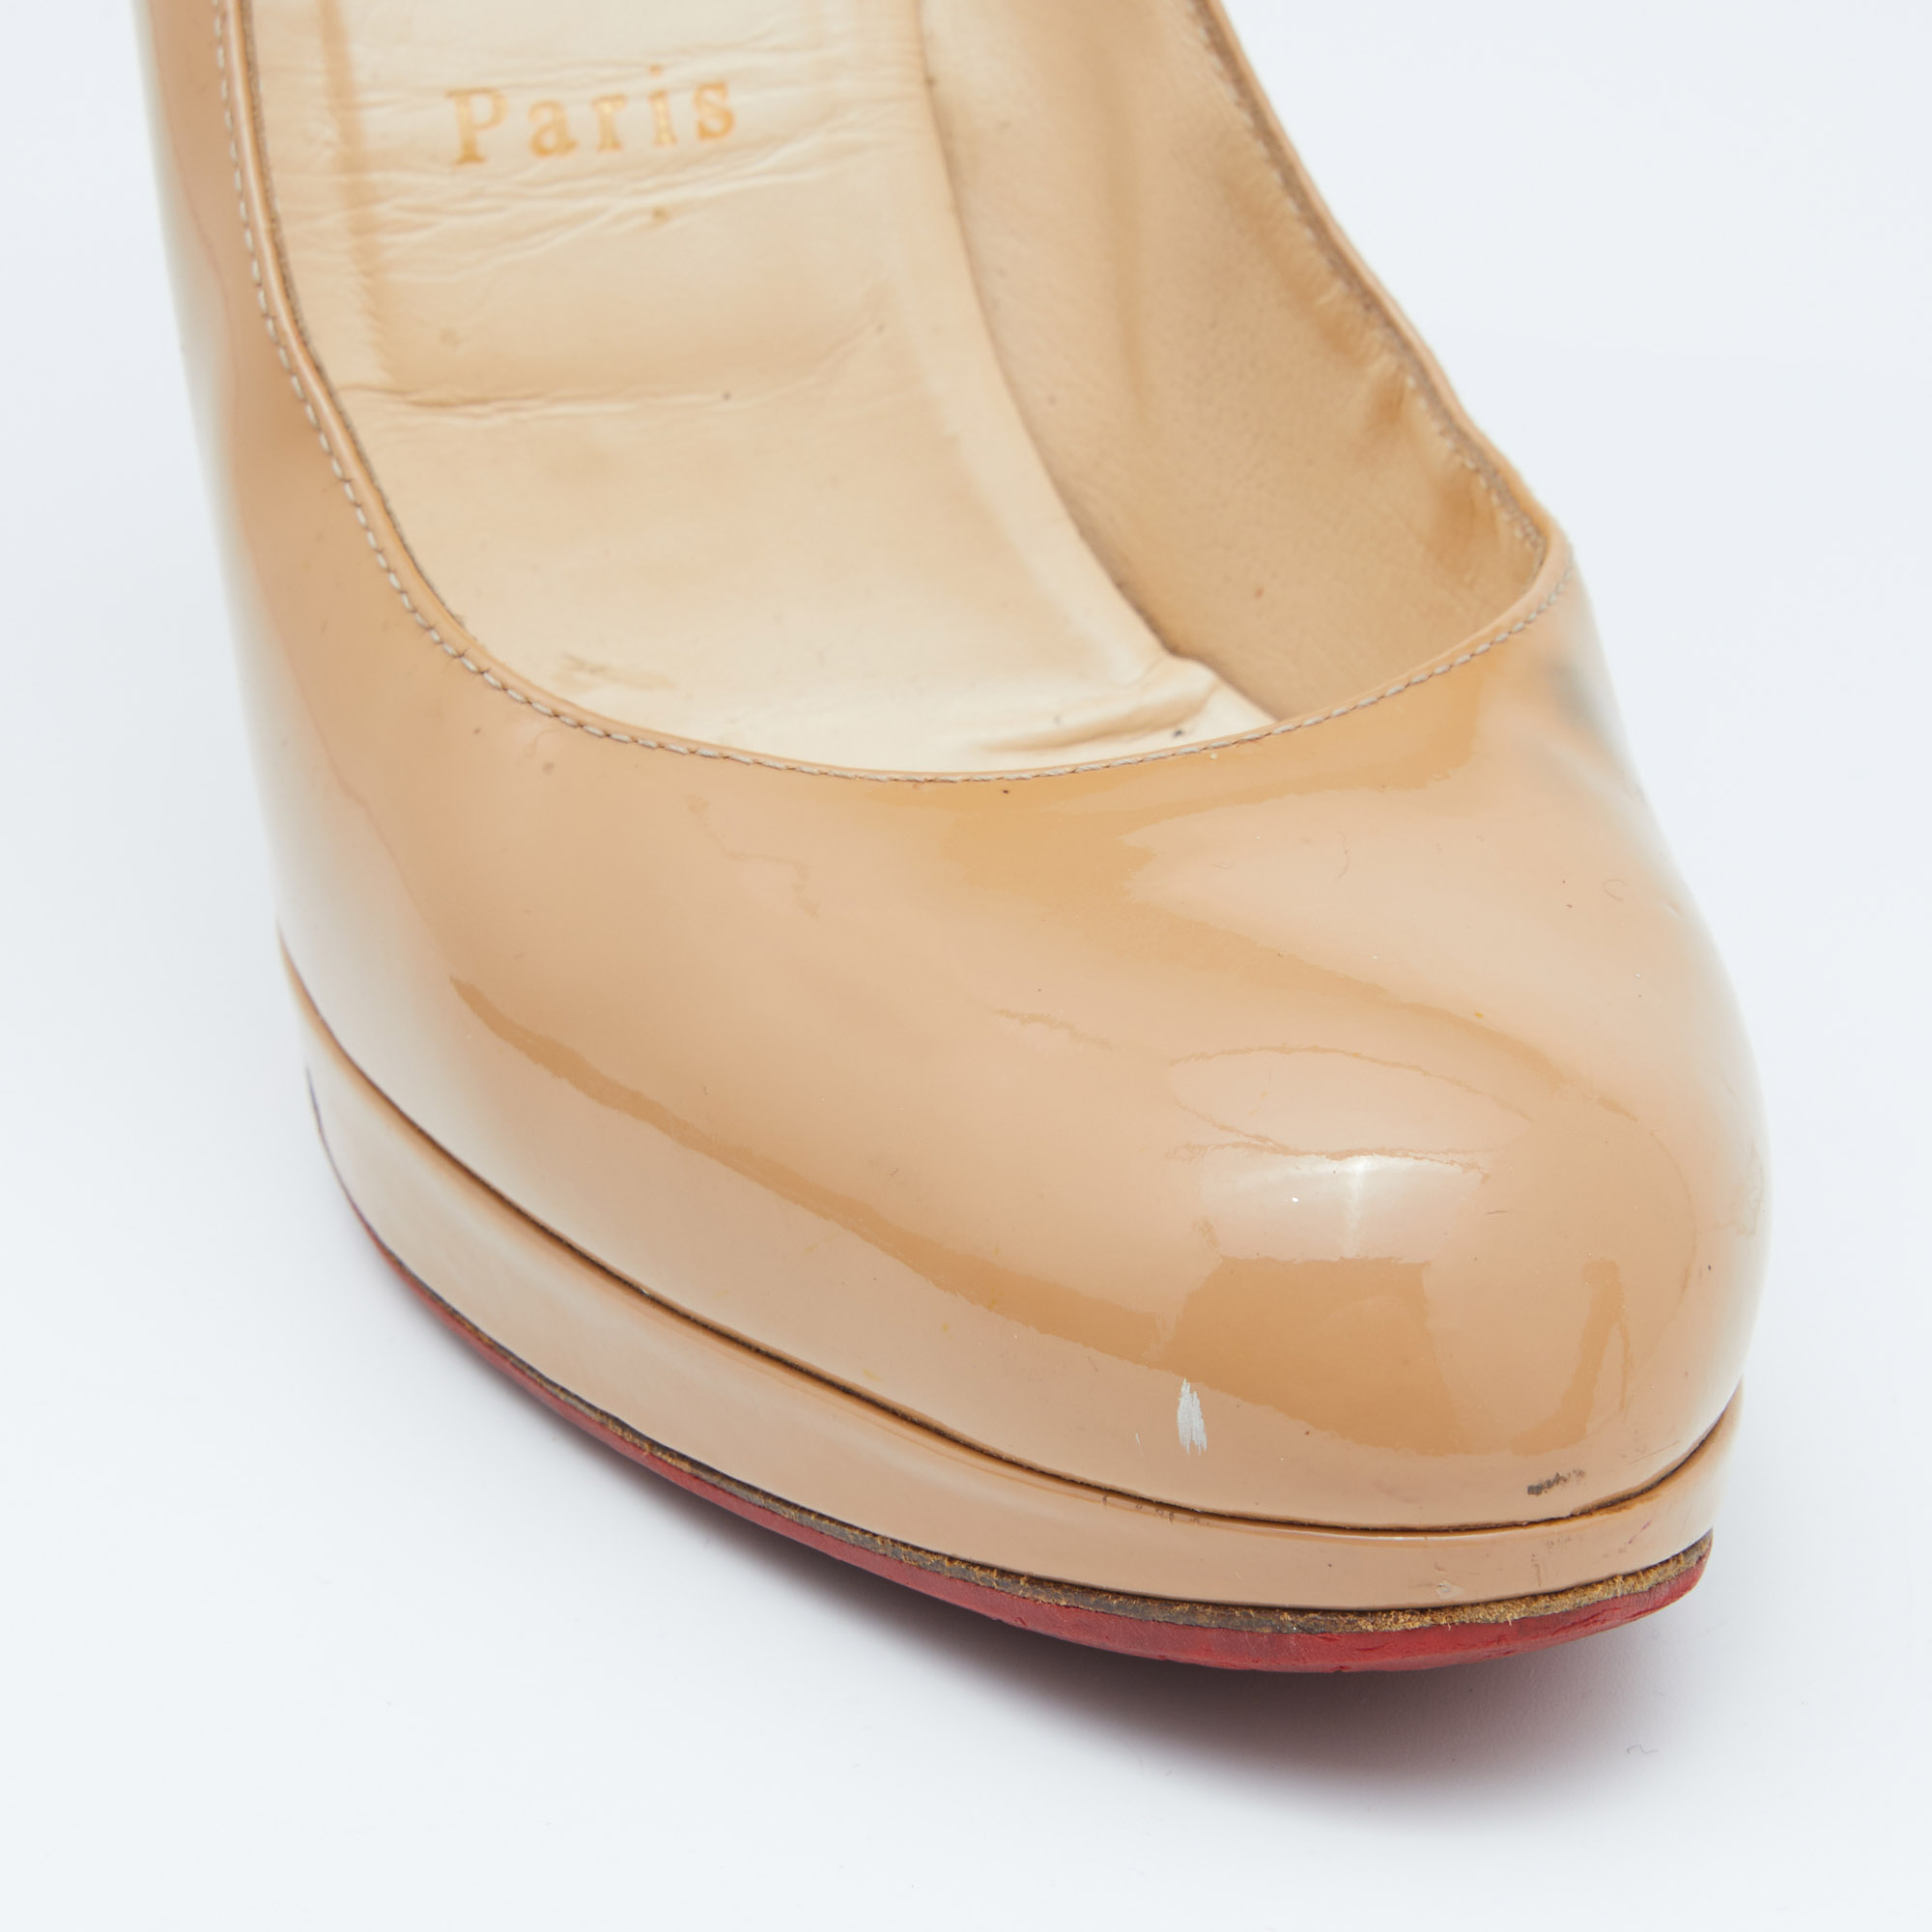 Christian Louboutin Beige Patent Leather New Simple Pumps Size 38.5